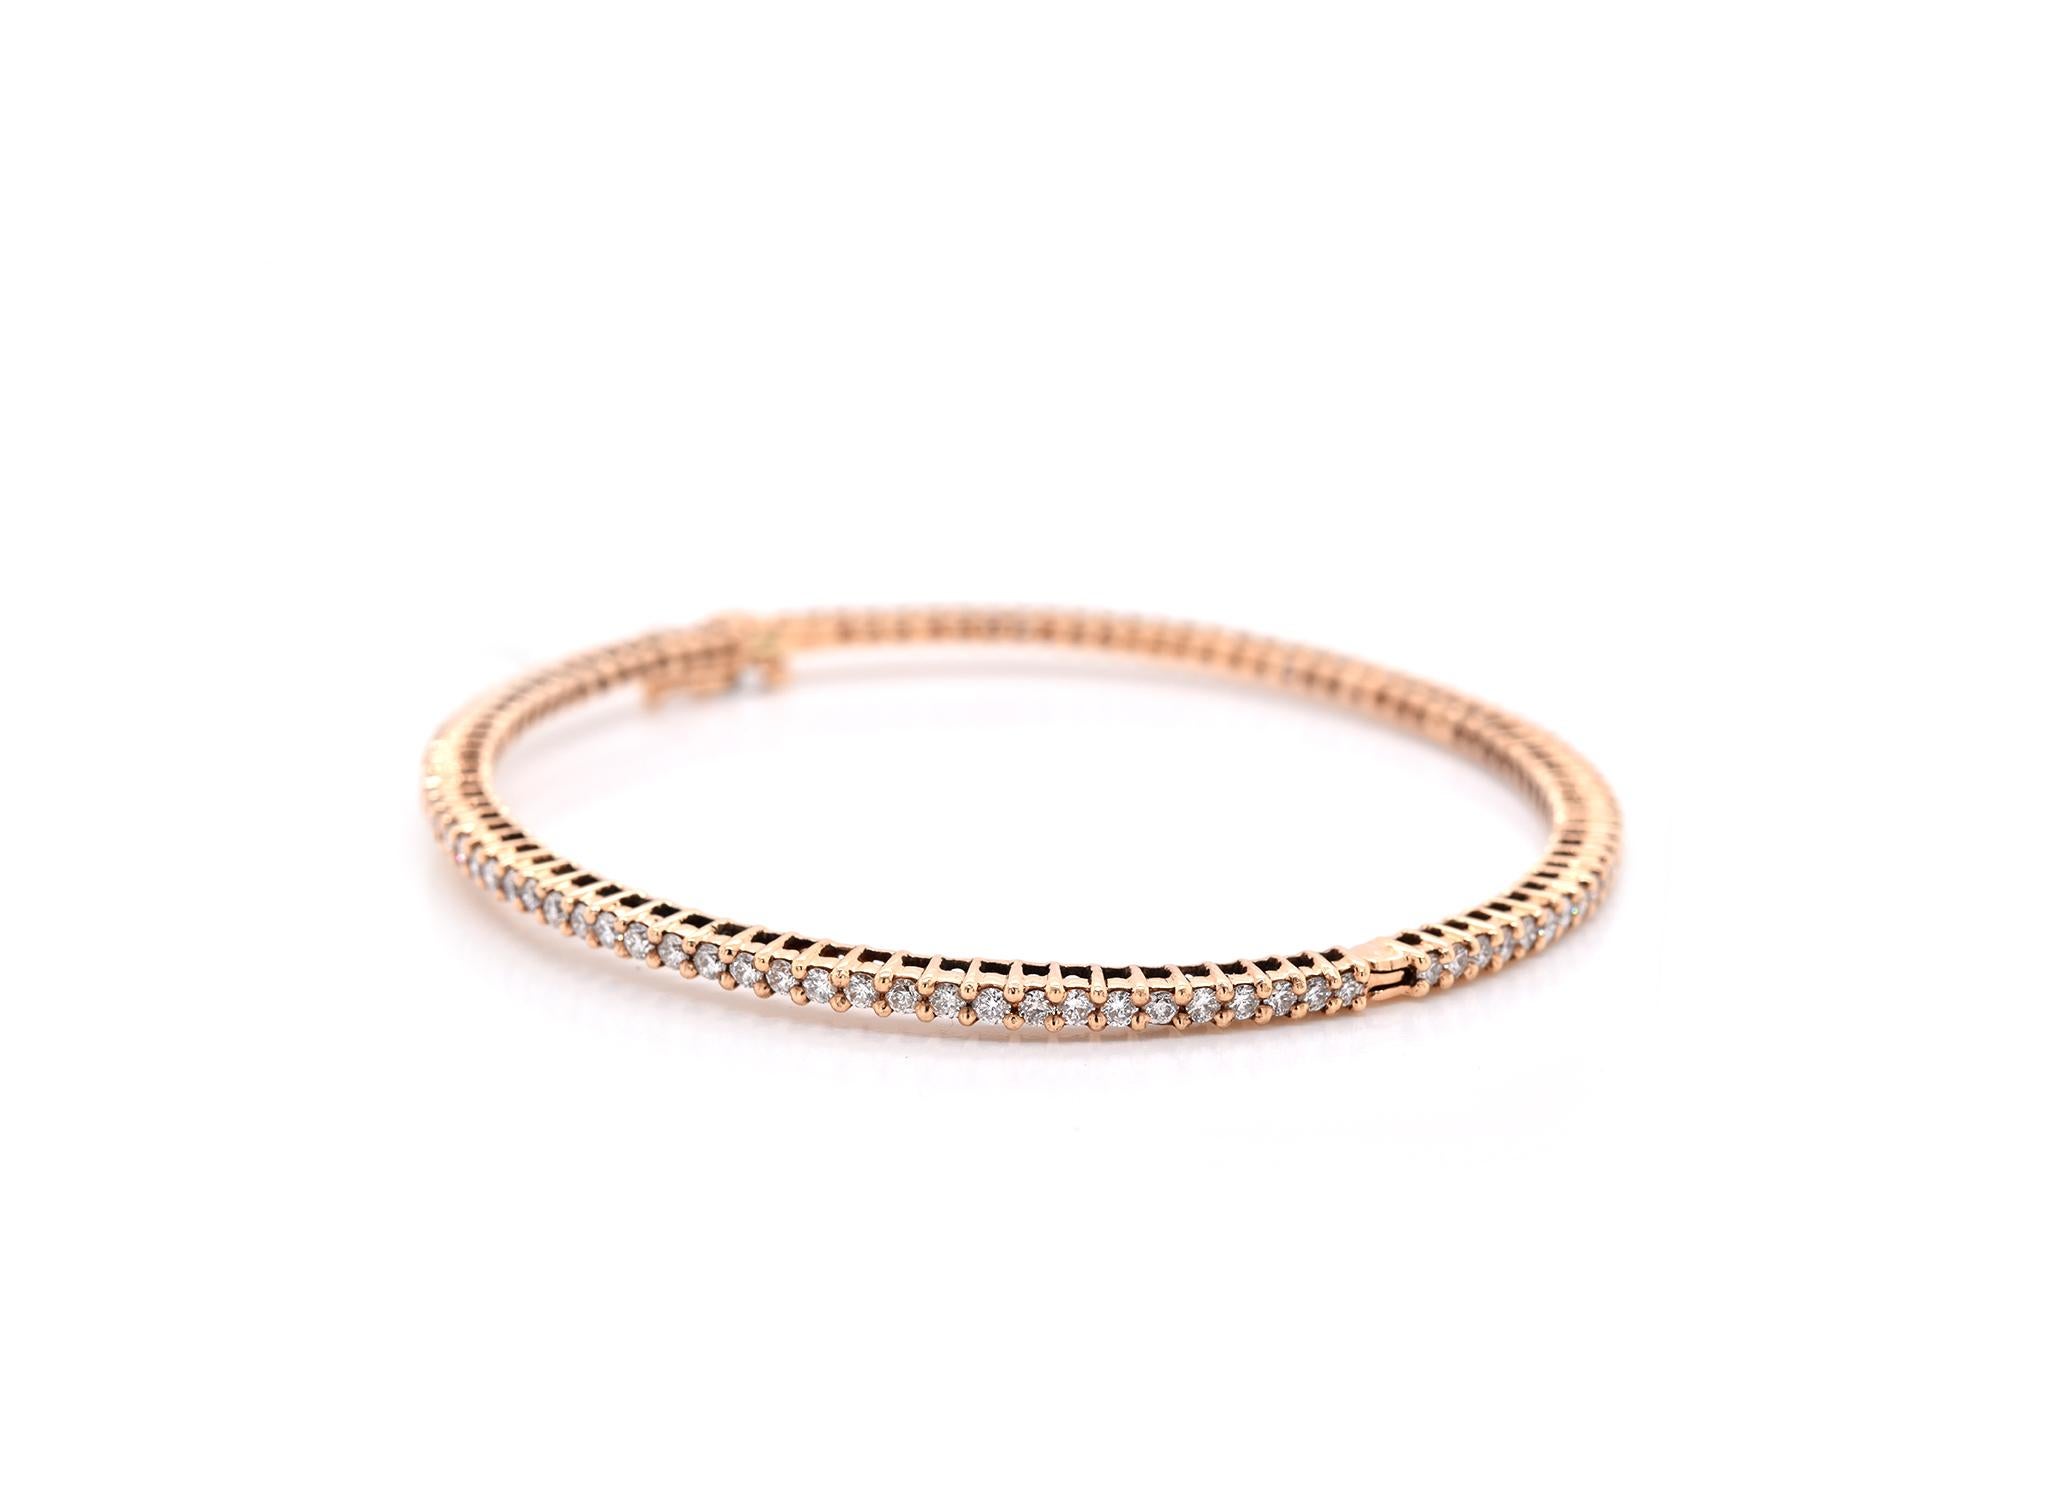 Material: 18k rose gold
Diamonds: 100 round brilliant cuts = 2.07cttw
Color: G
Clarity: VS
Dimensions: bracelet measures 7-inches in length
Weight: 11.1 grams
